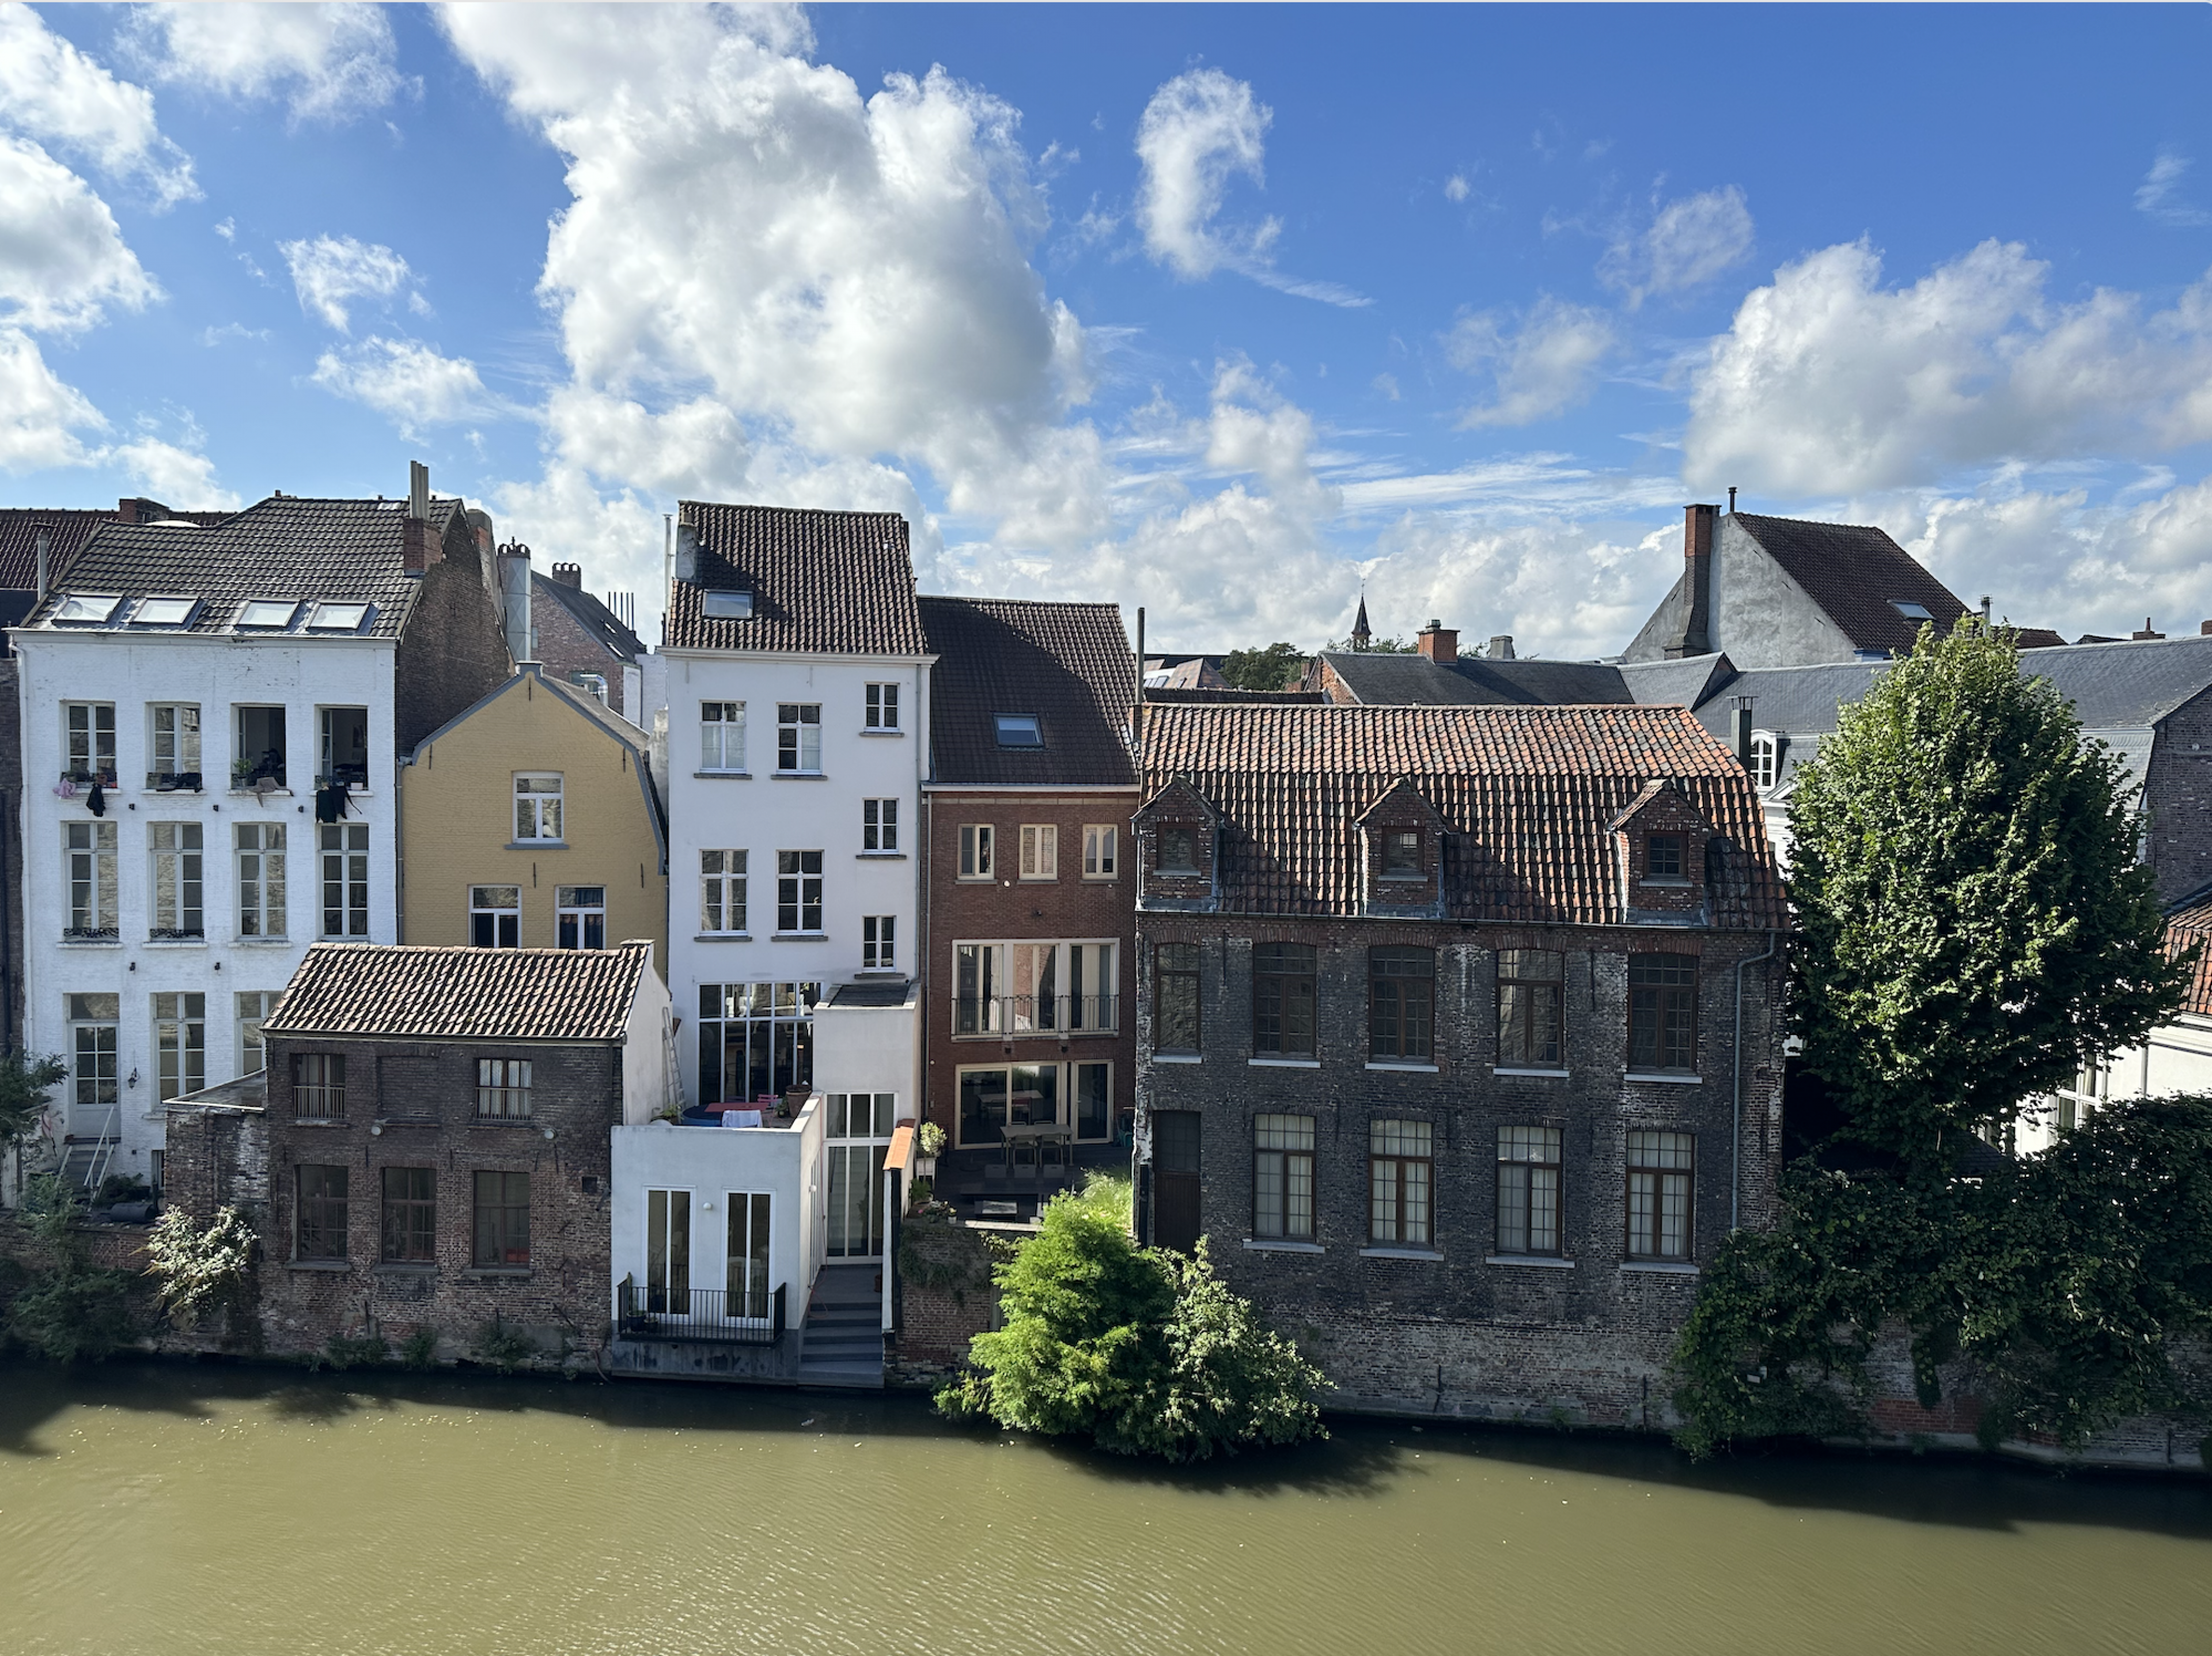 view of canal in Ghent, Belgium